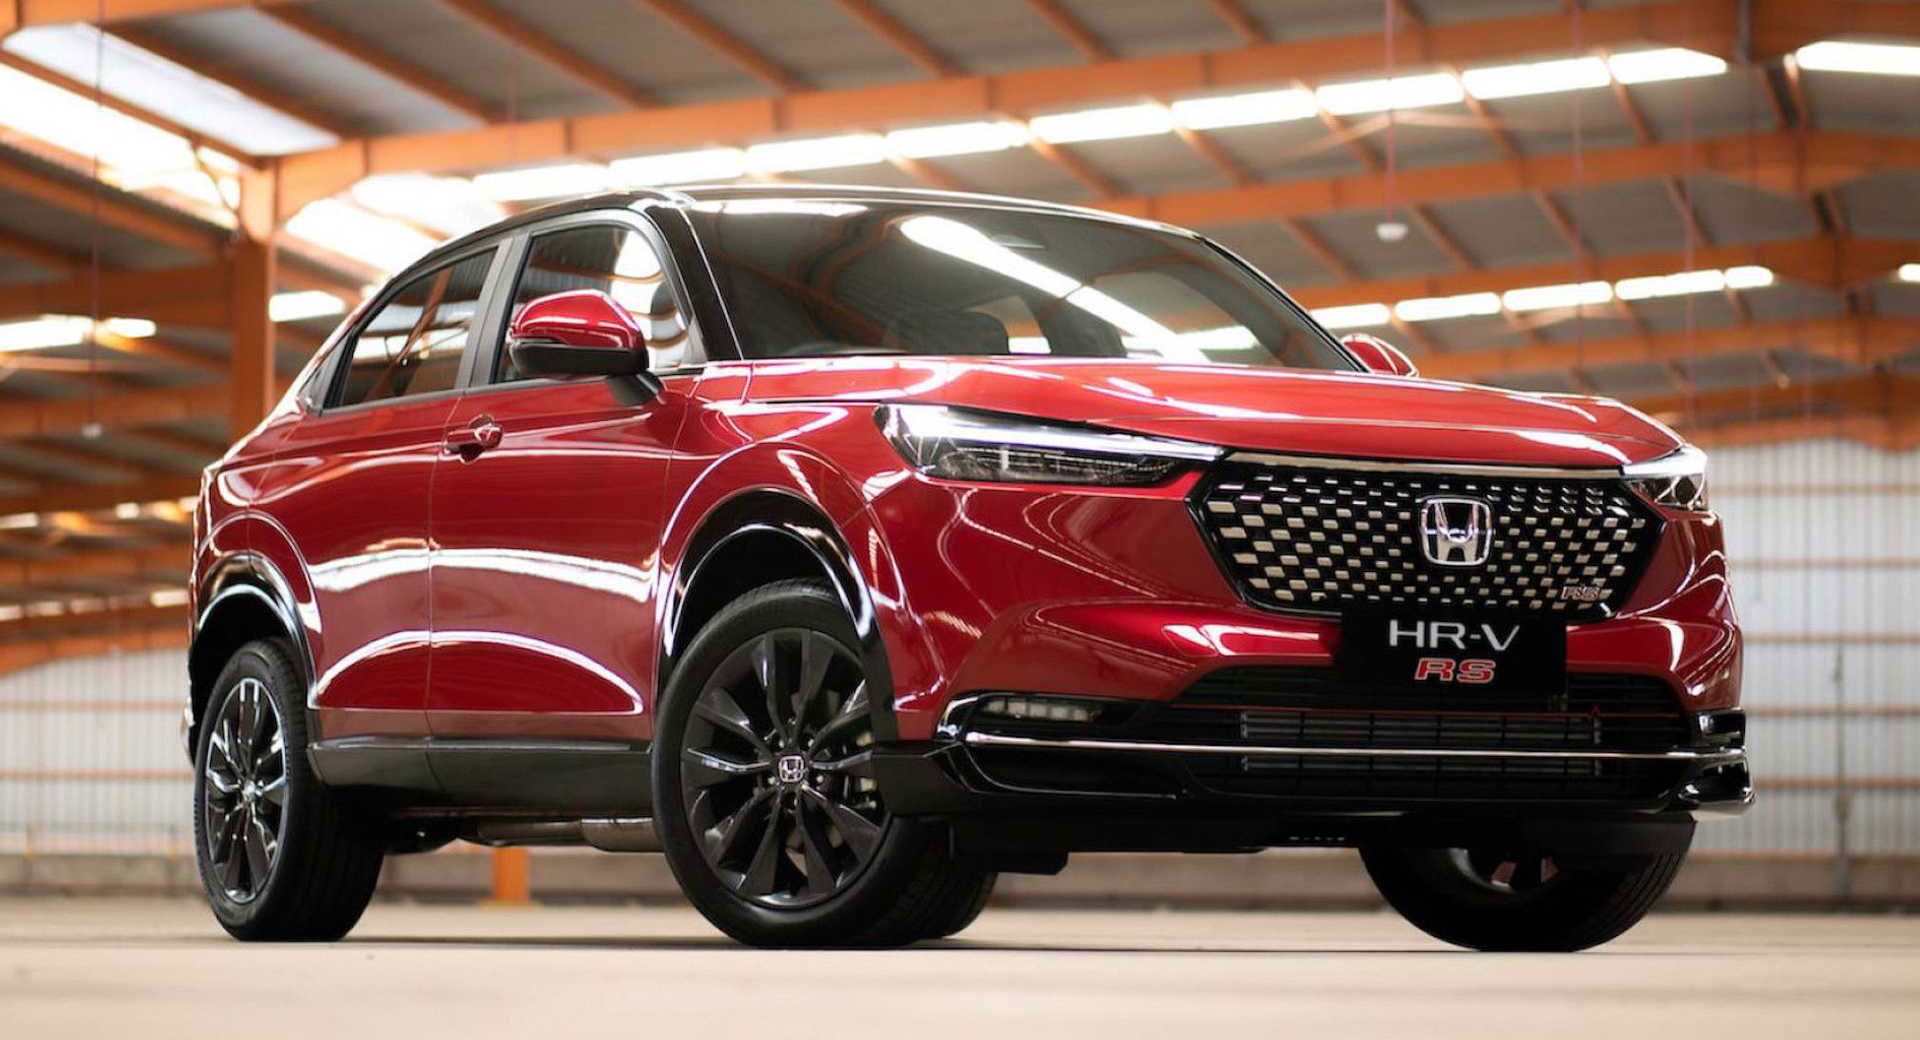 2023 Honda HR-V Pricing, Features, and Full Specs Revealed